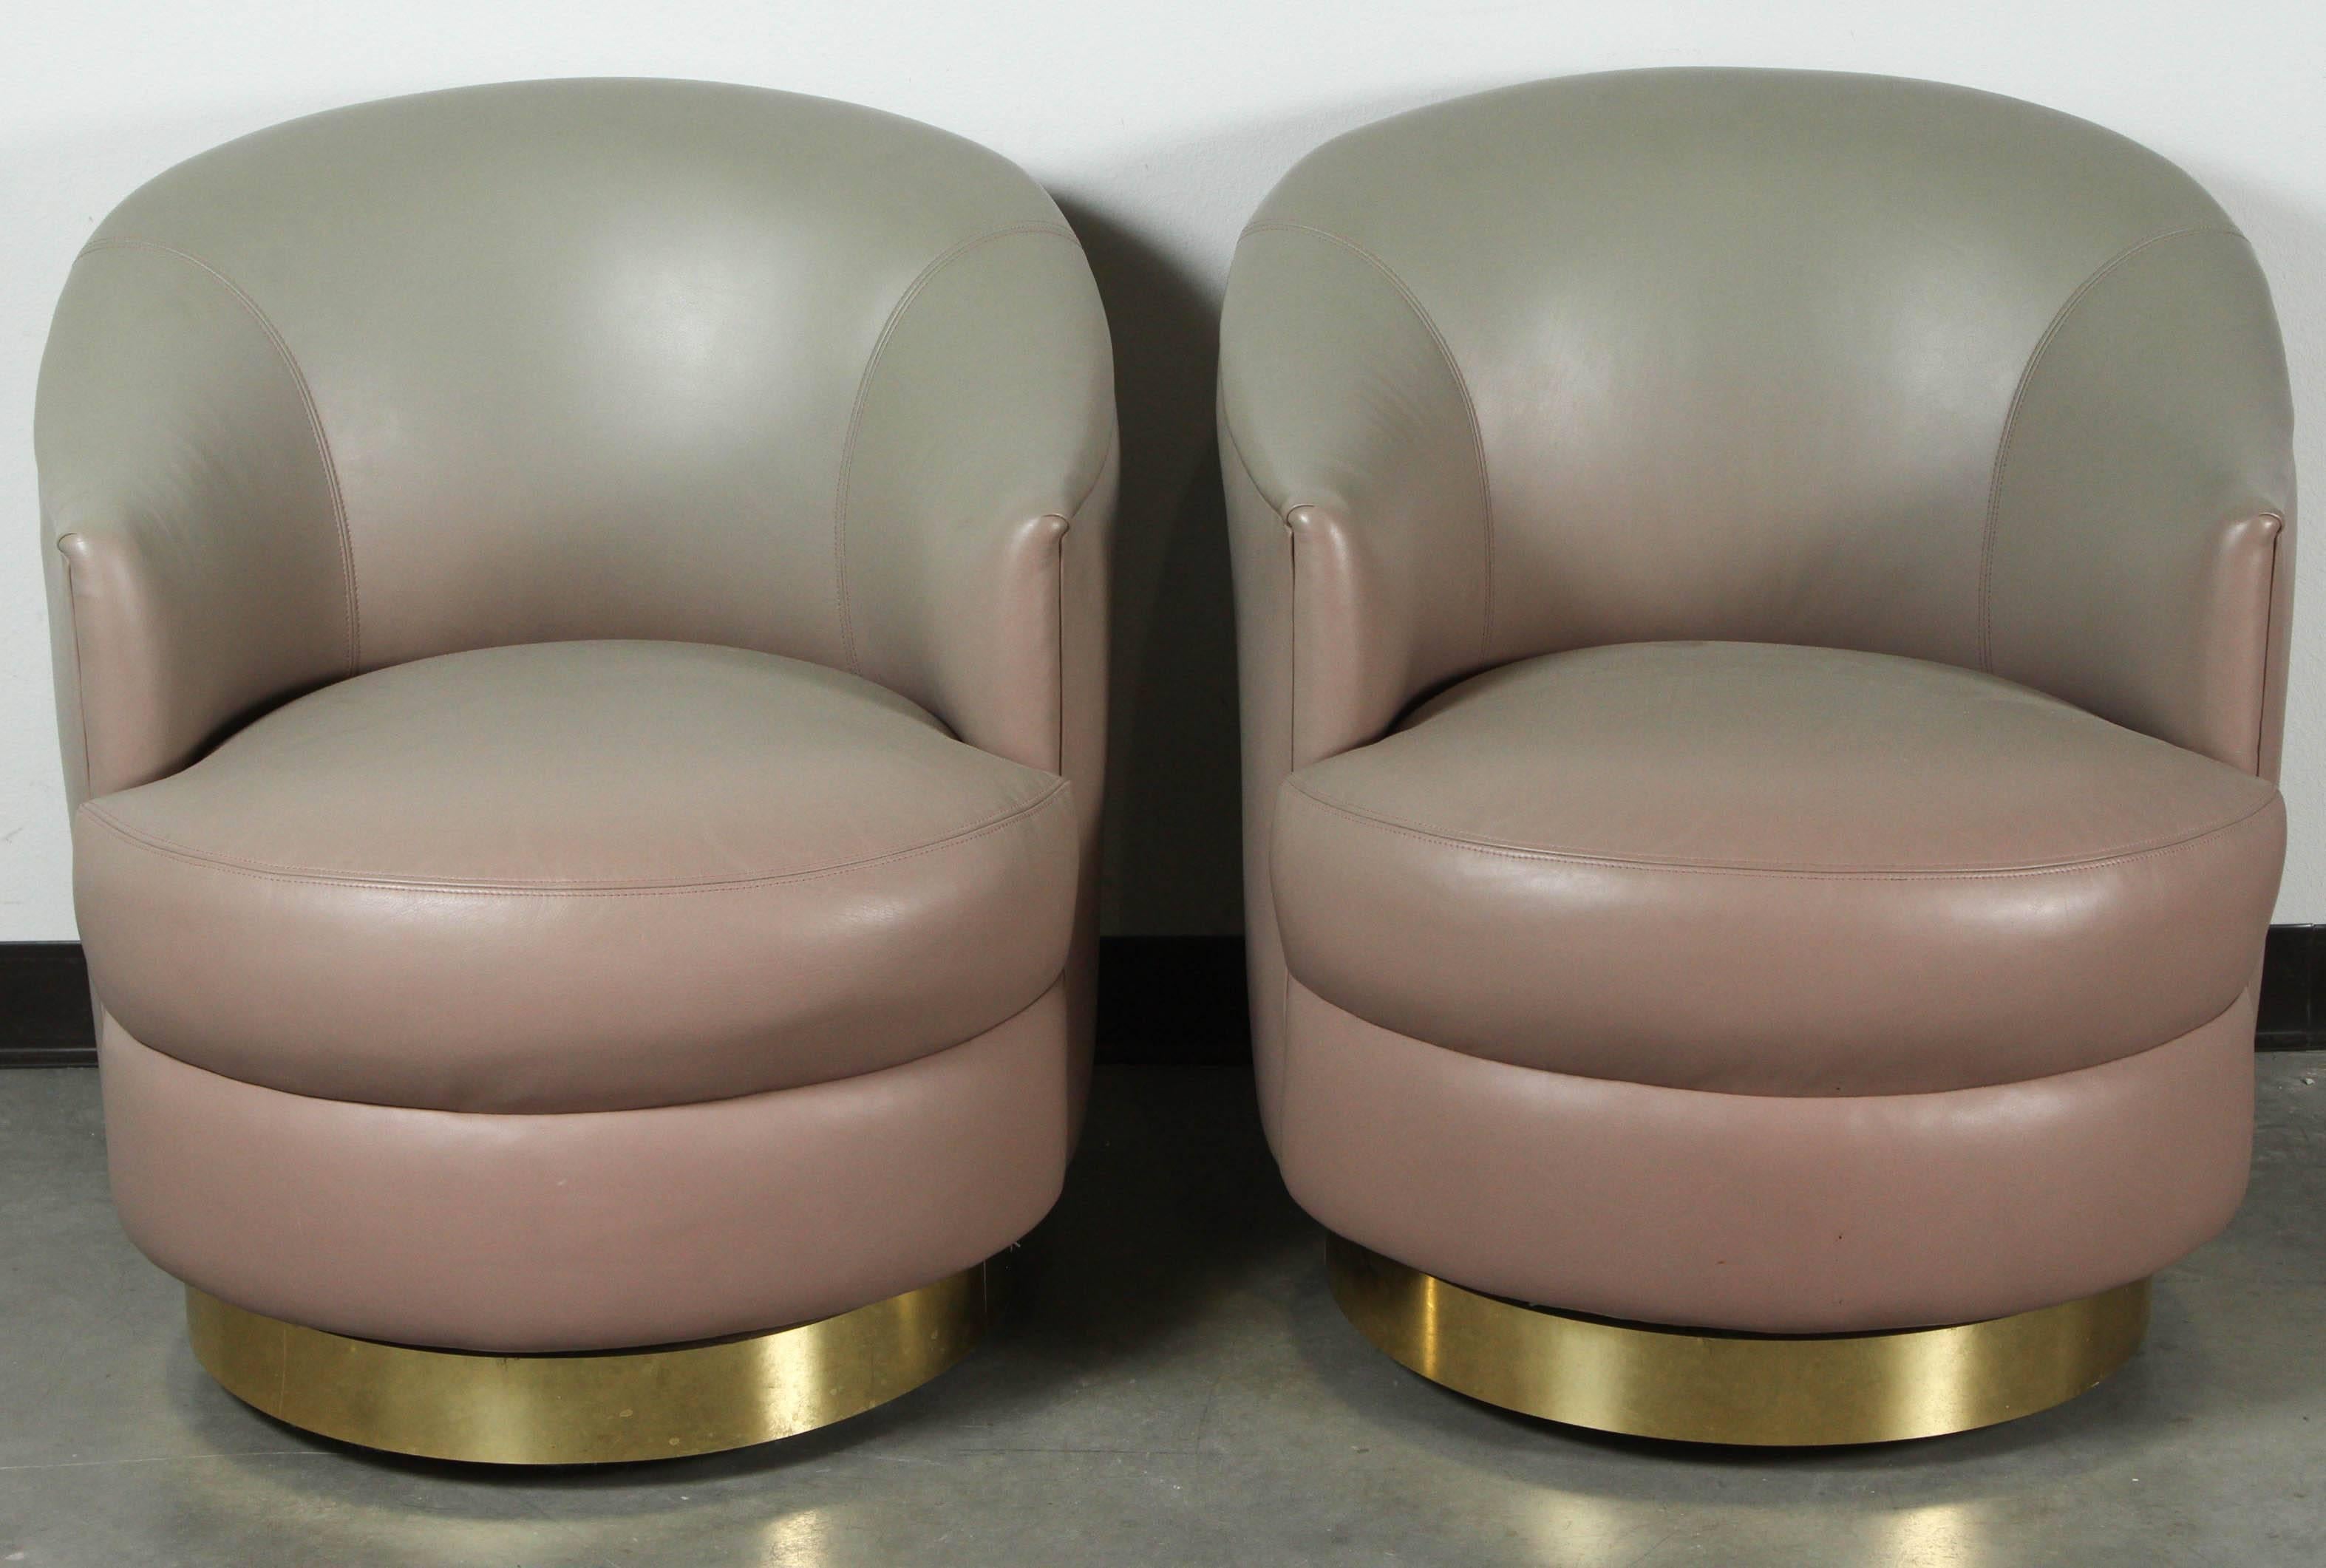 Fabulous pair of Swivel chairs designed by Steve Chase.
The chairs retain their original gray ombre leather that is in near perfect condition and they sit on polished brass bases.
The chairs were acquired from an Indian wells Estate designed